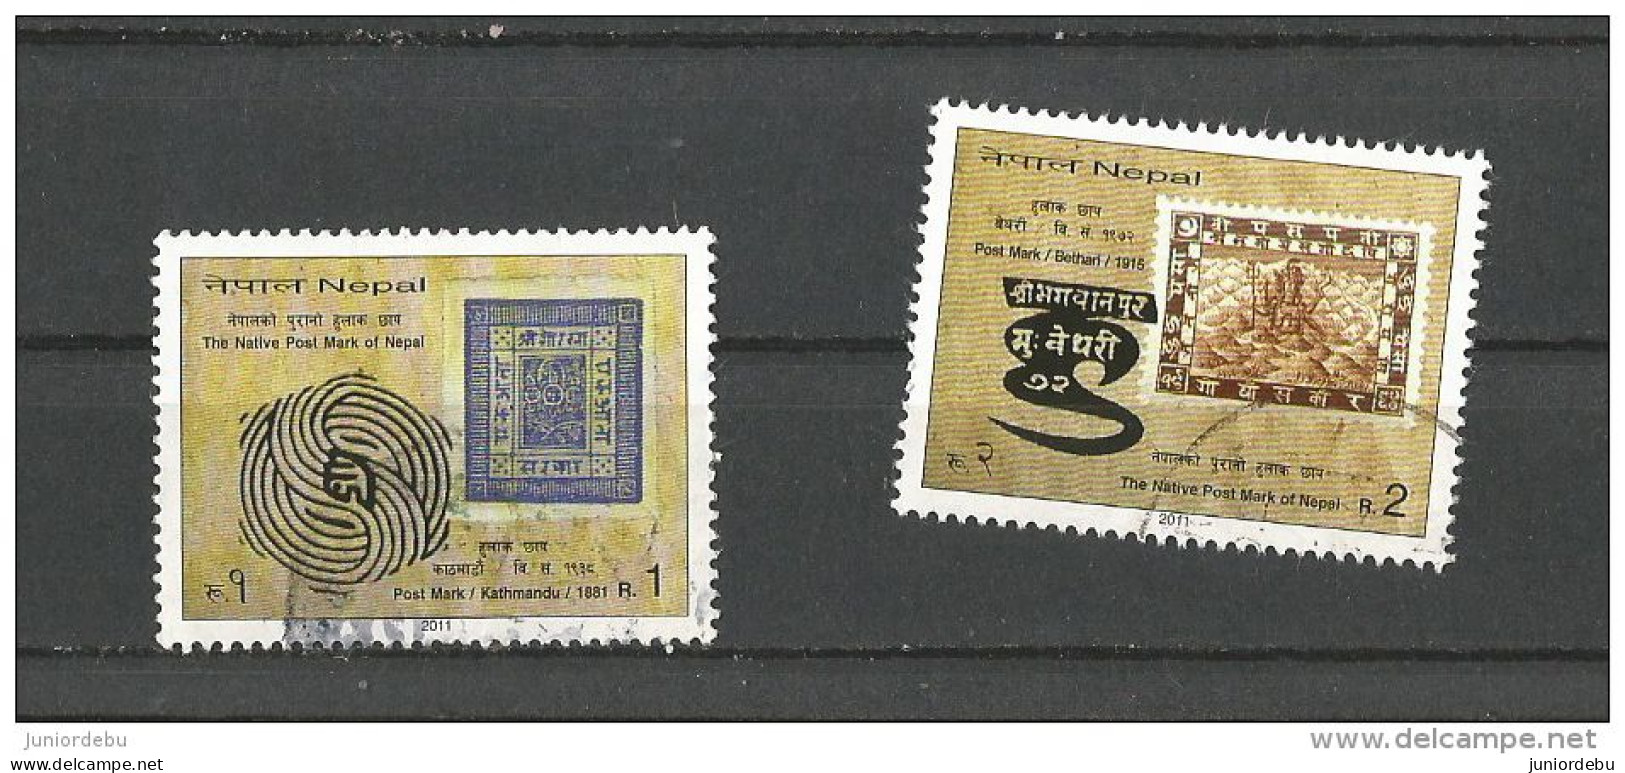 Nepal - 2011 - Native Post Mark Of Nepal - 2 Diff  - USED - ( Condition As Per Scan ) ( OL  27/04/2014) - Nepal